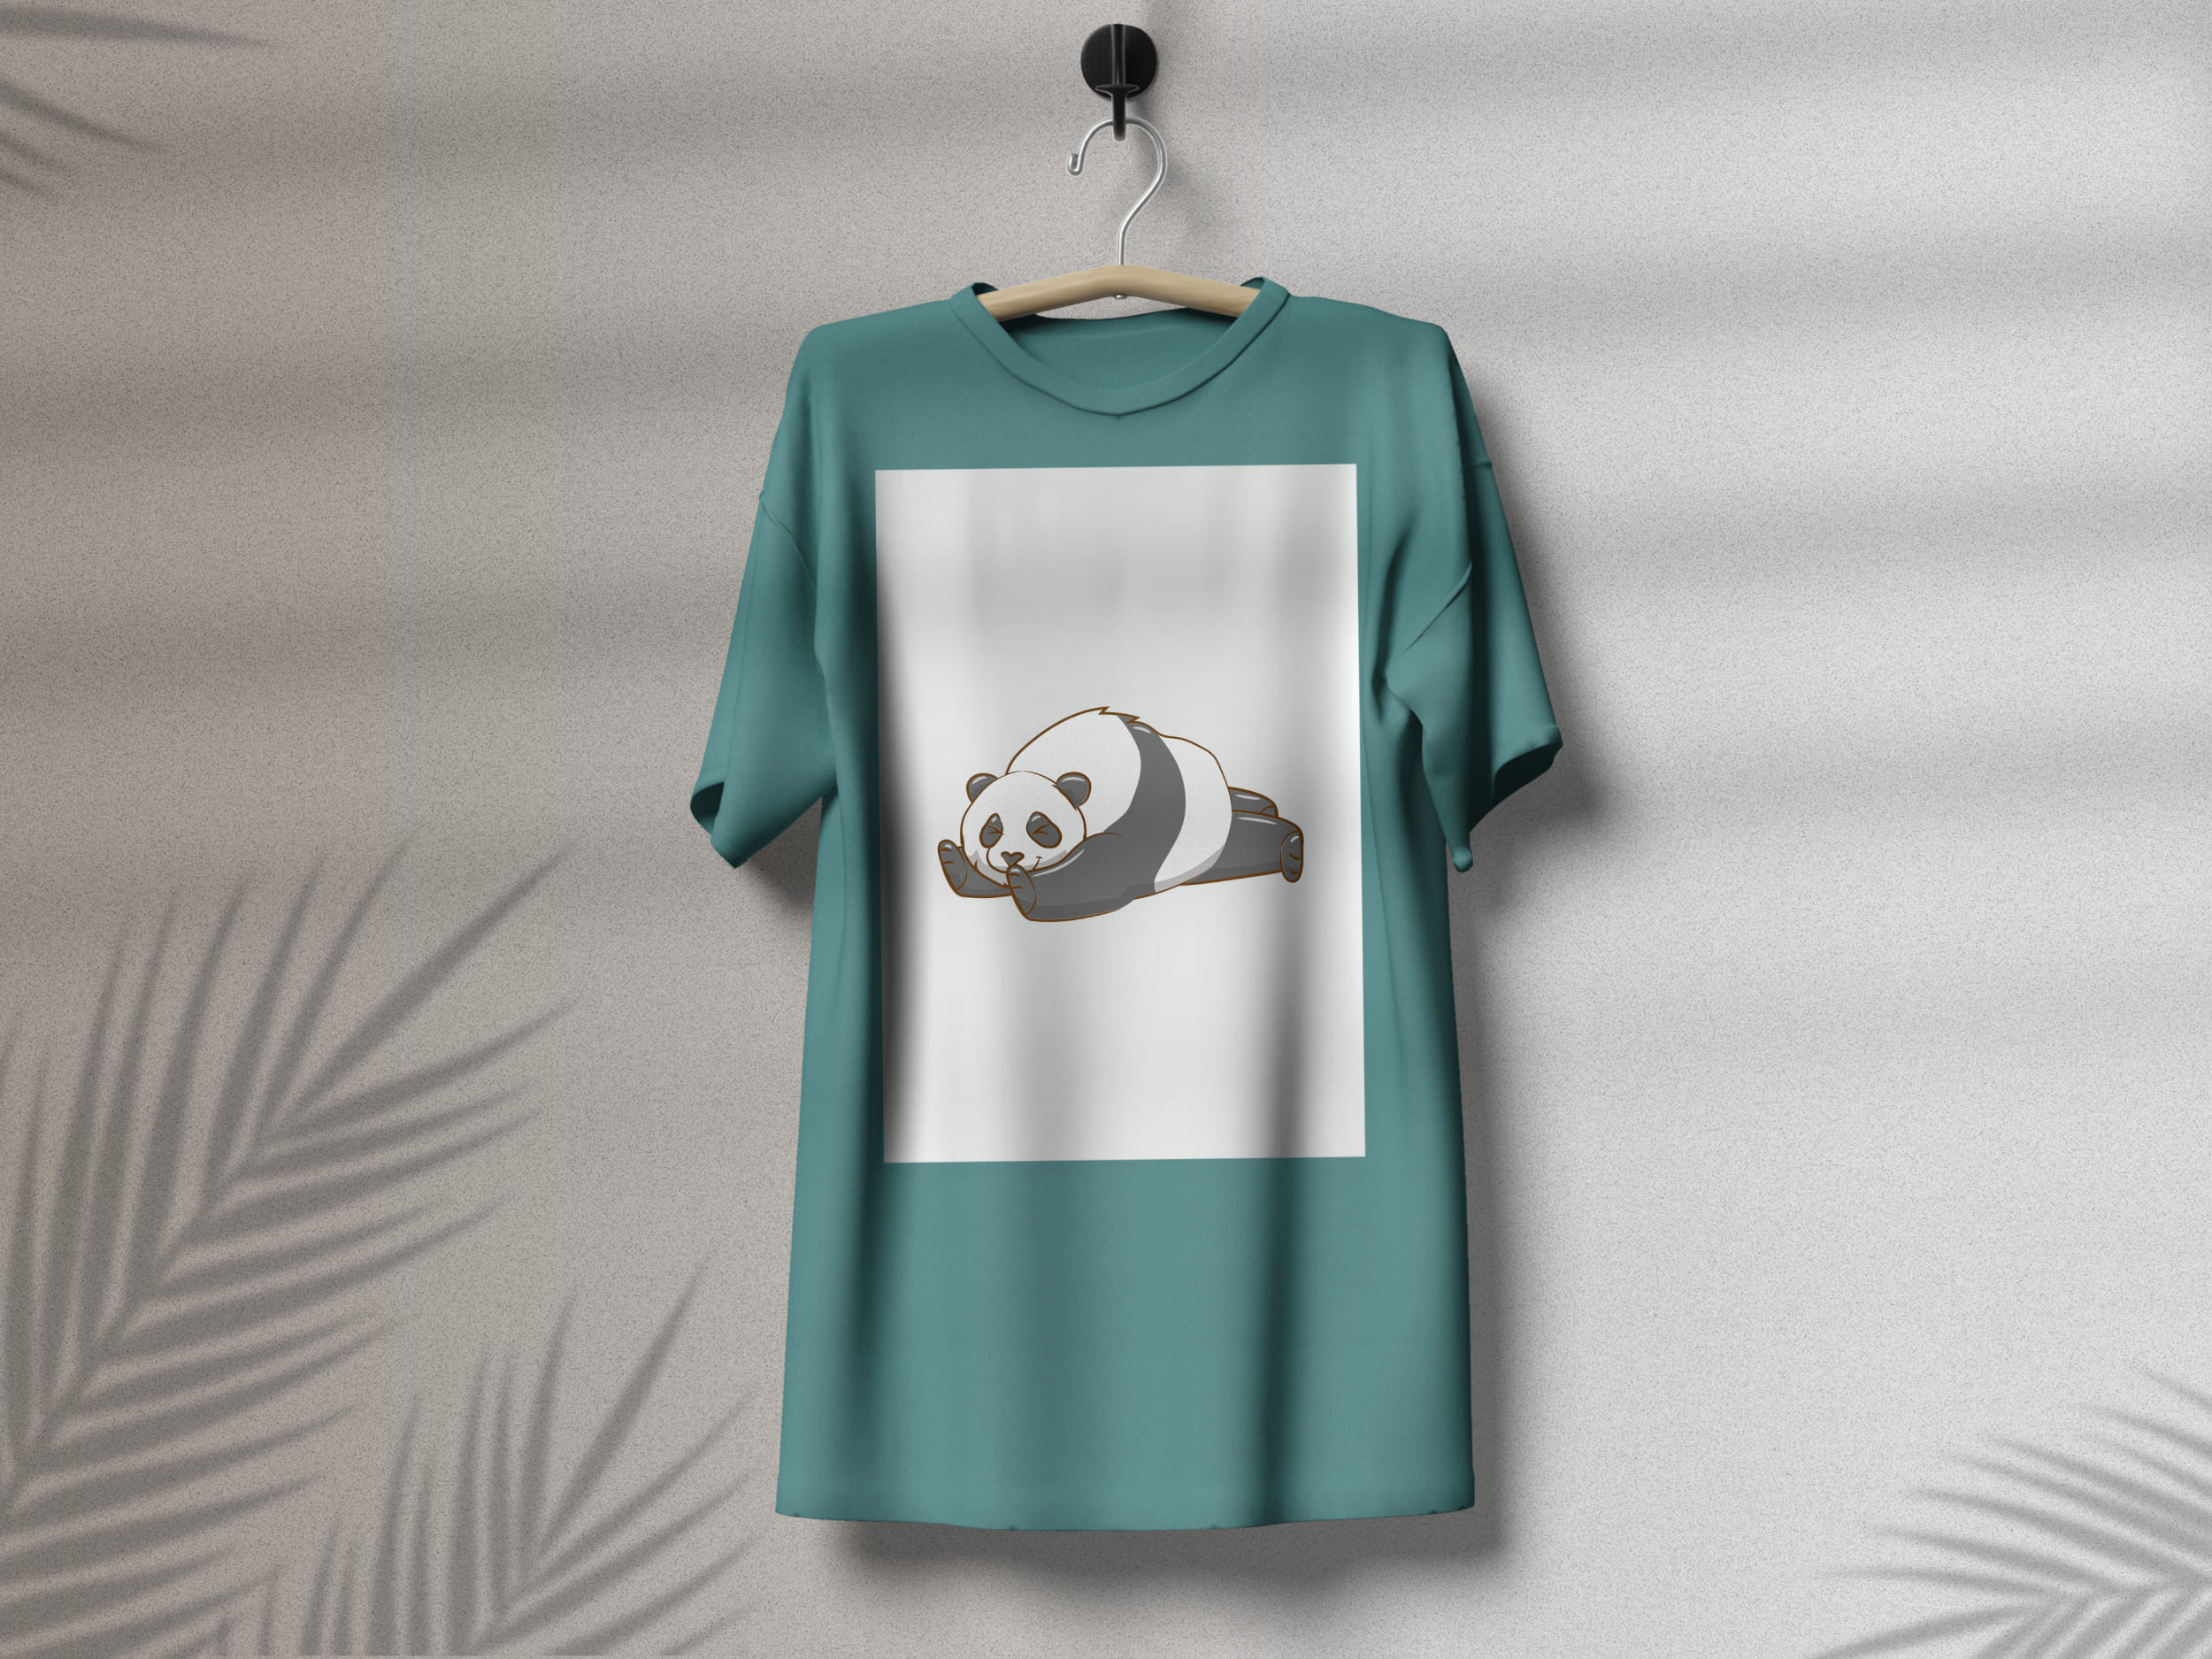 Turquoise t-shirt with a sleeping panda on a white background, on a hanger on a gray background